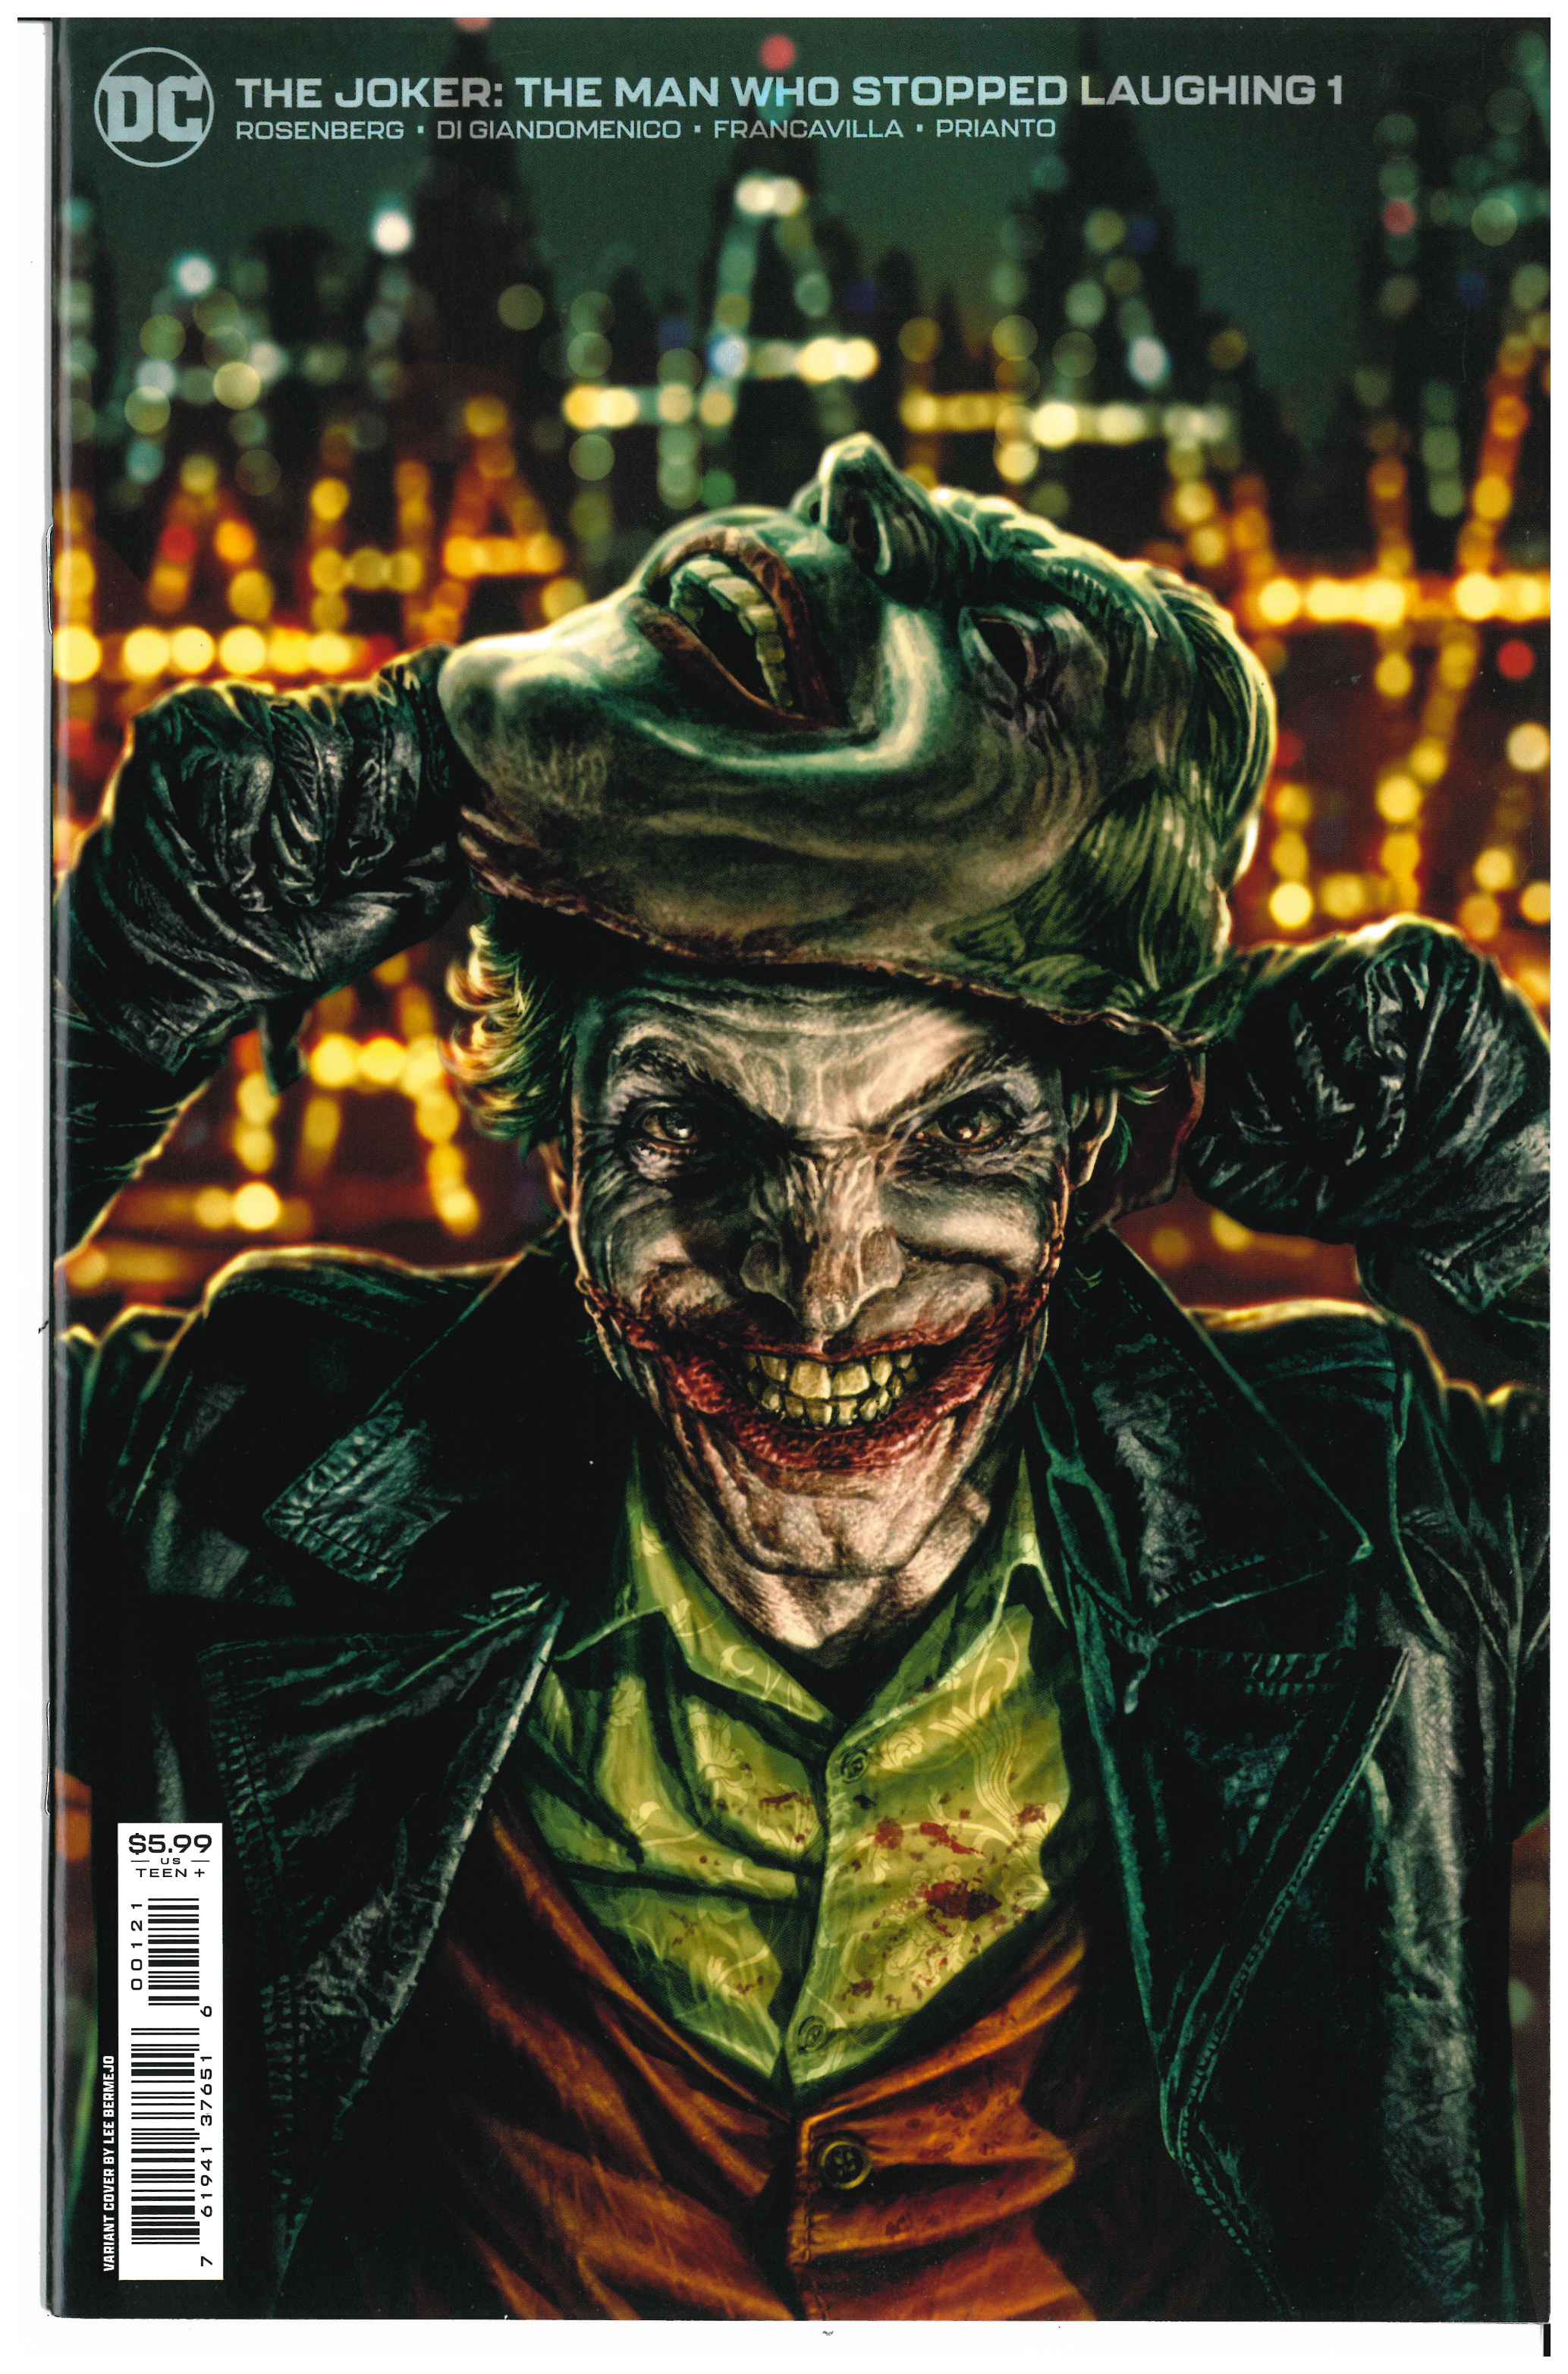 The Joker: The Mann Who Stopped Laughing #1